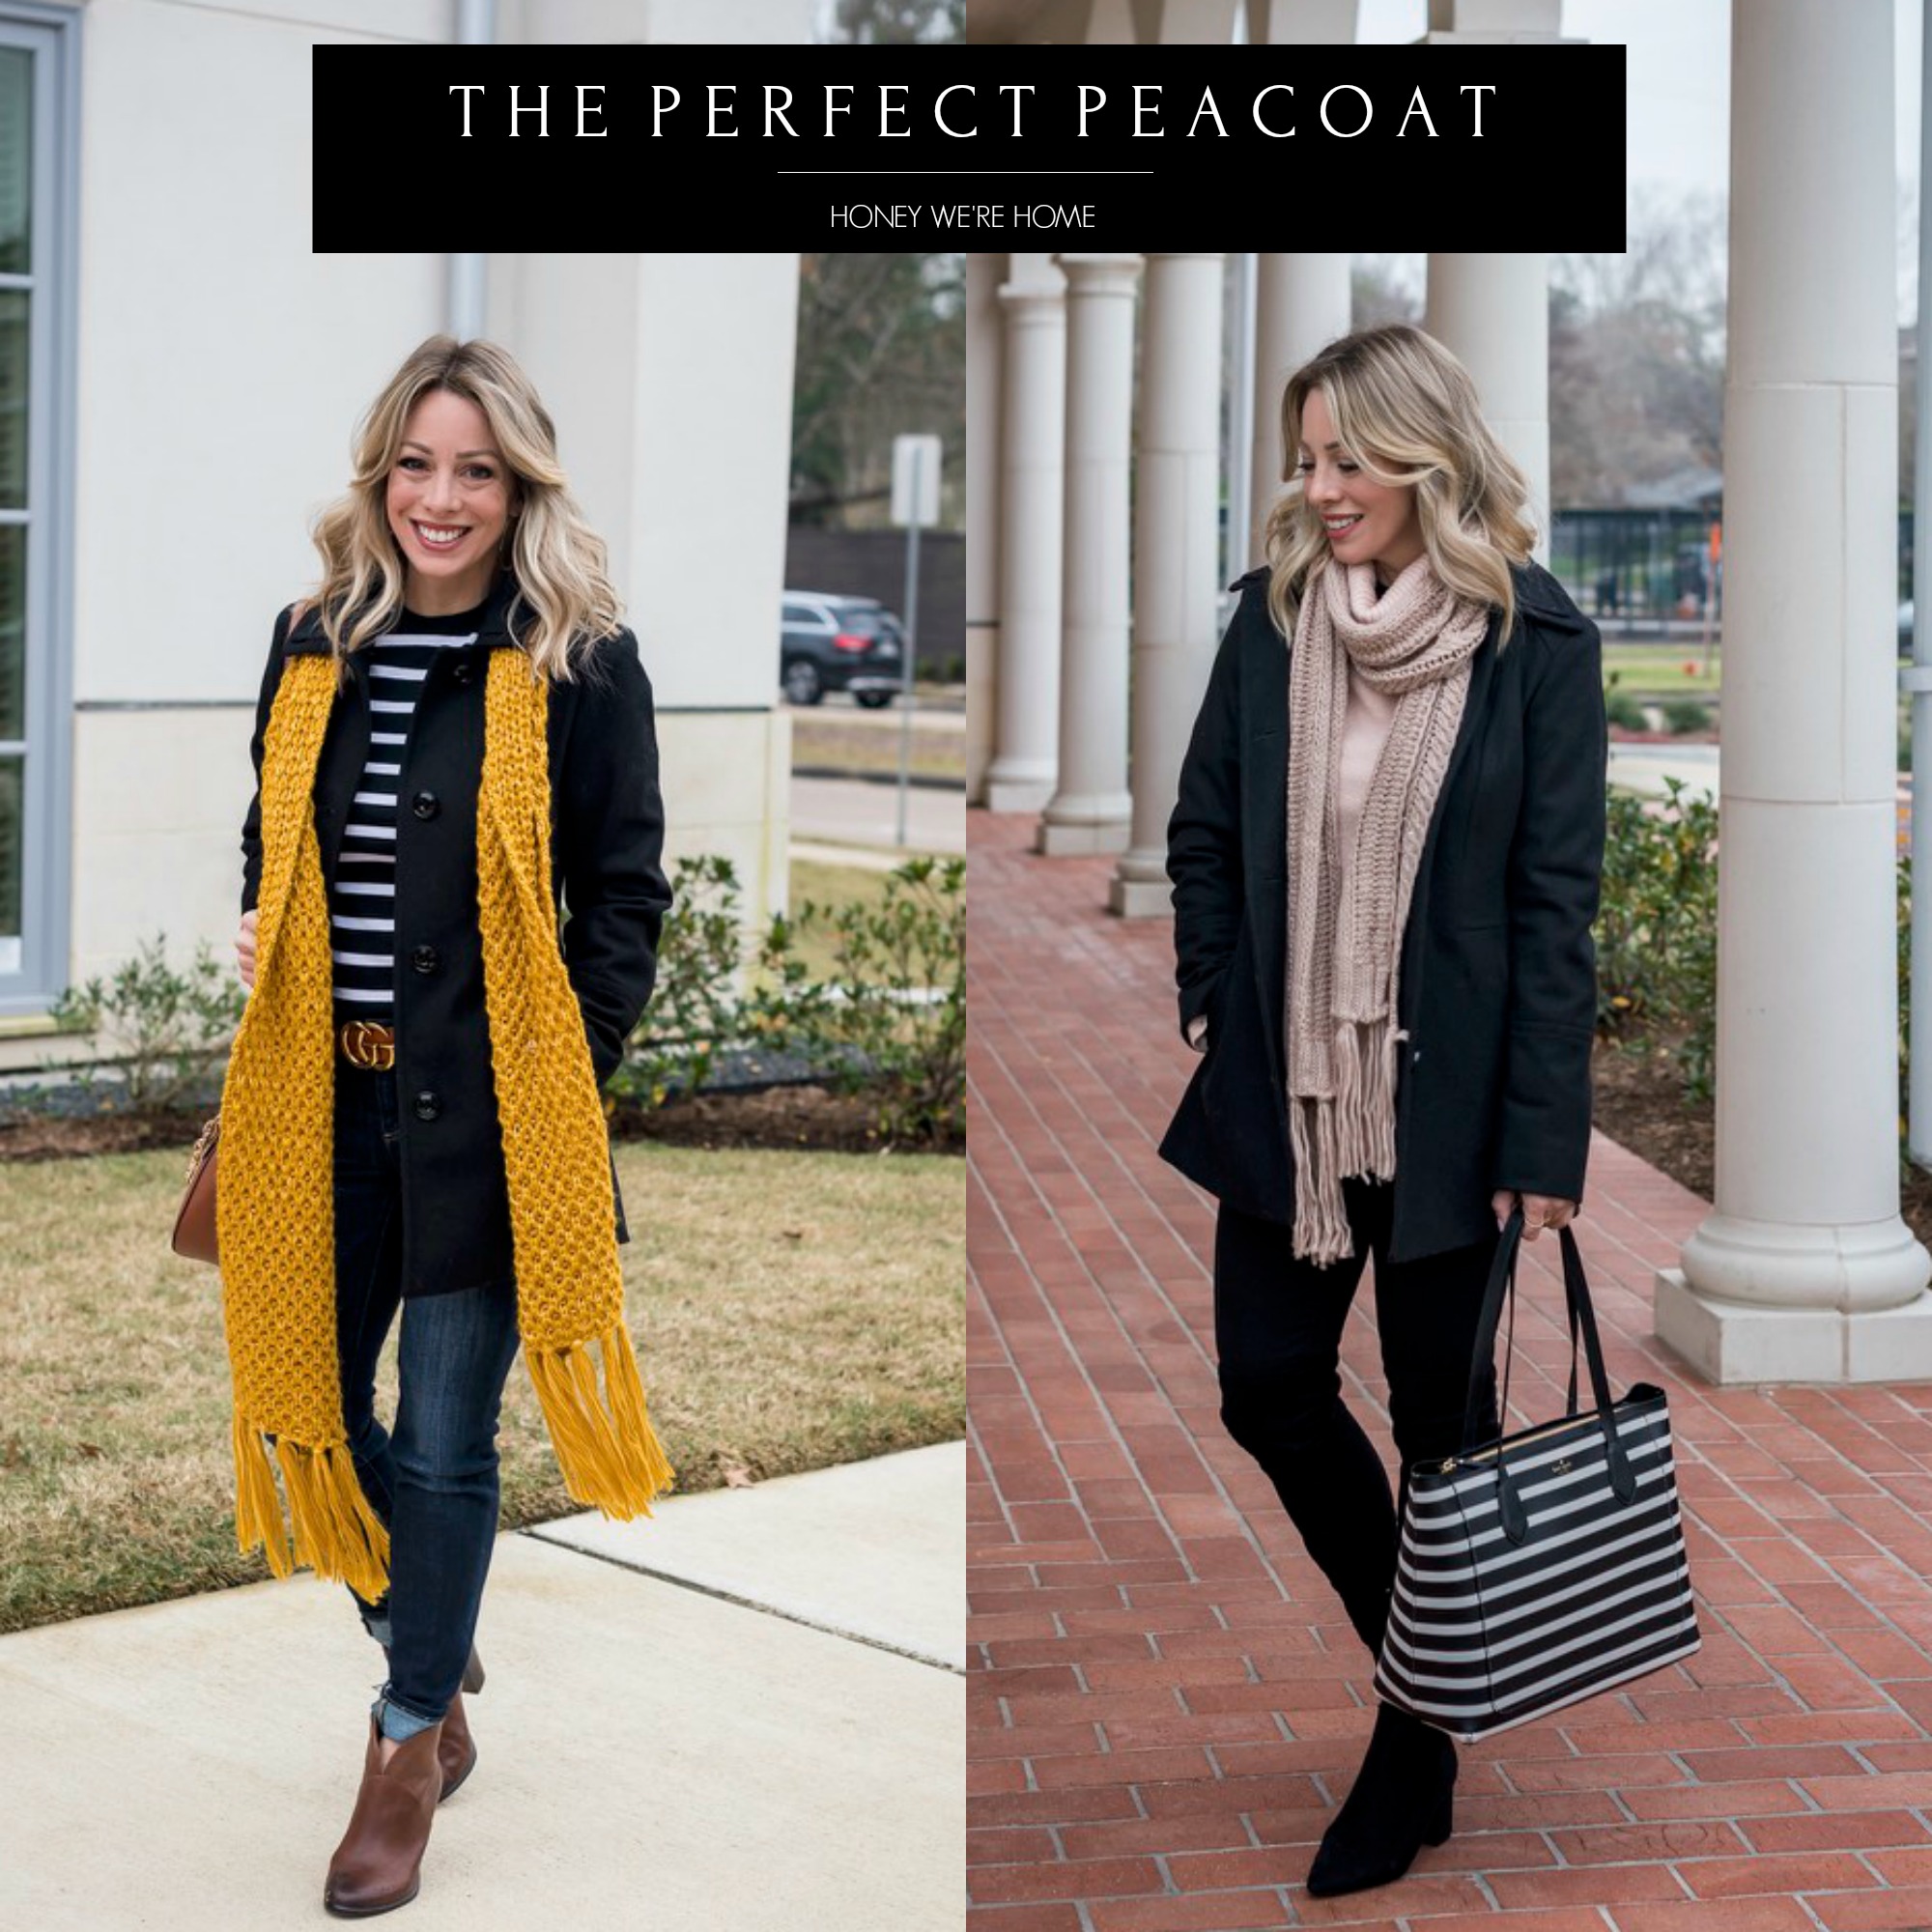 The Perfect Peacoat